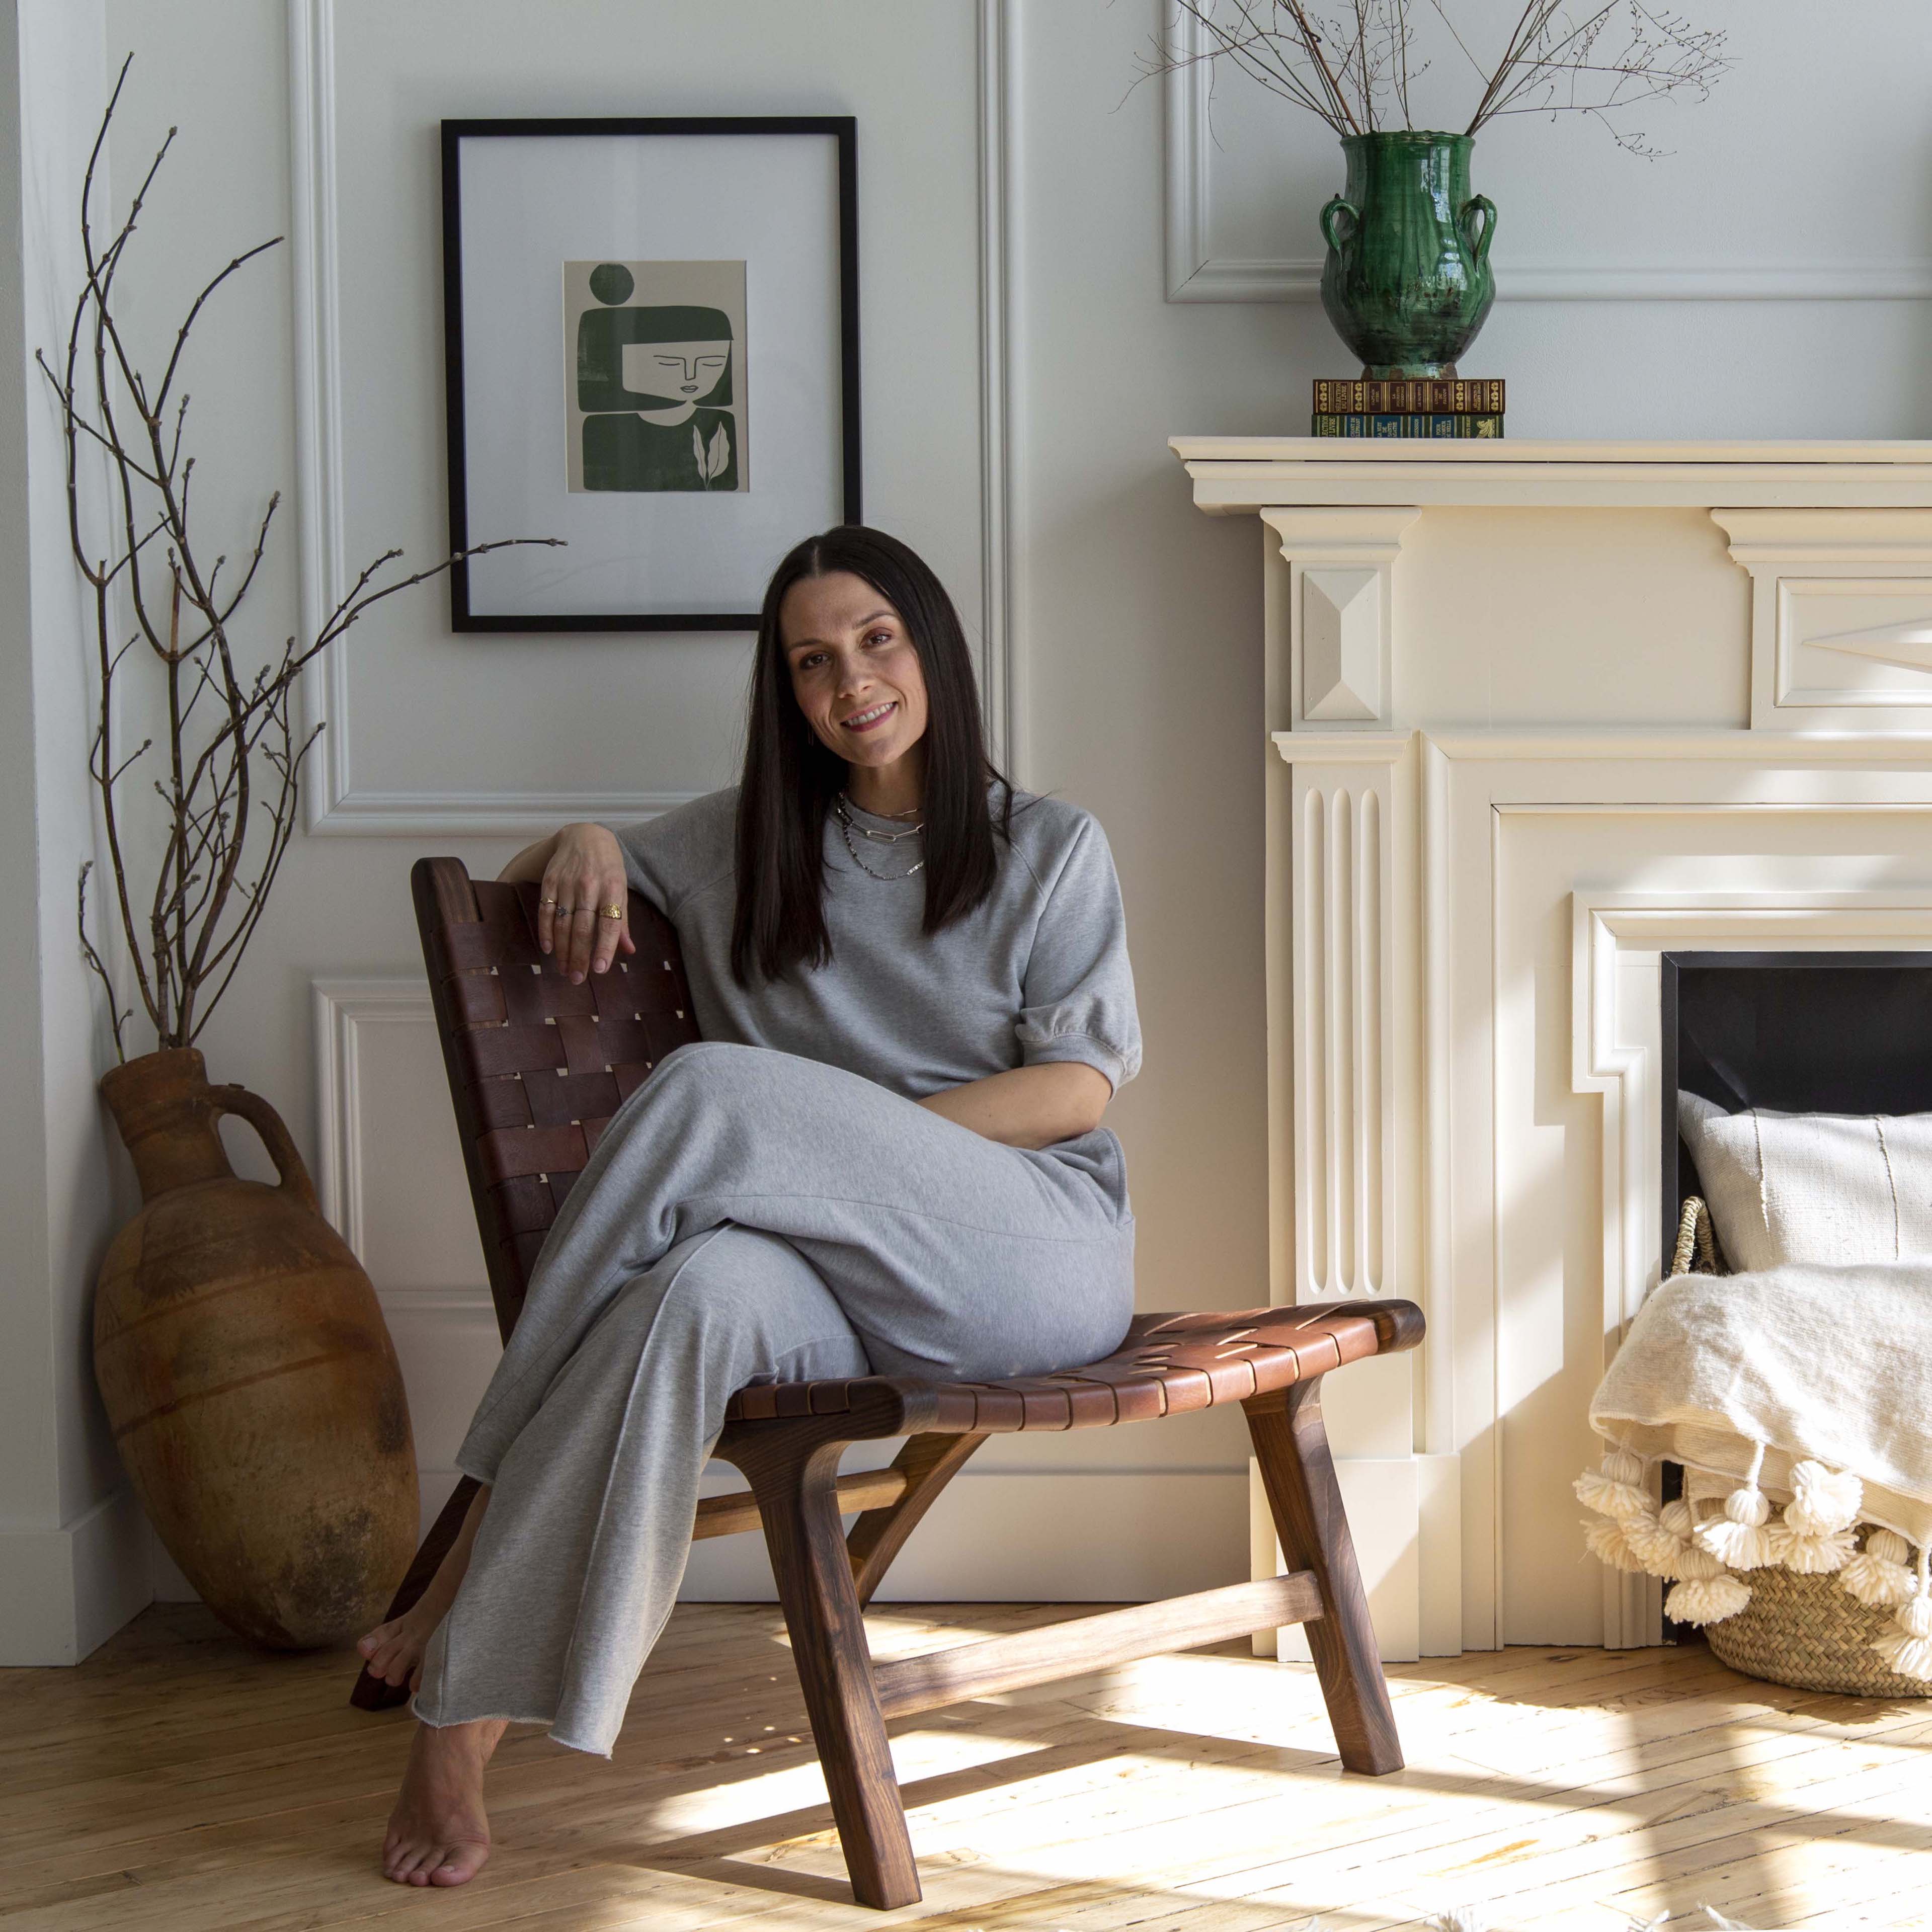 At Home With: Tanya Tessier